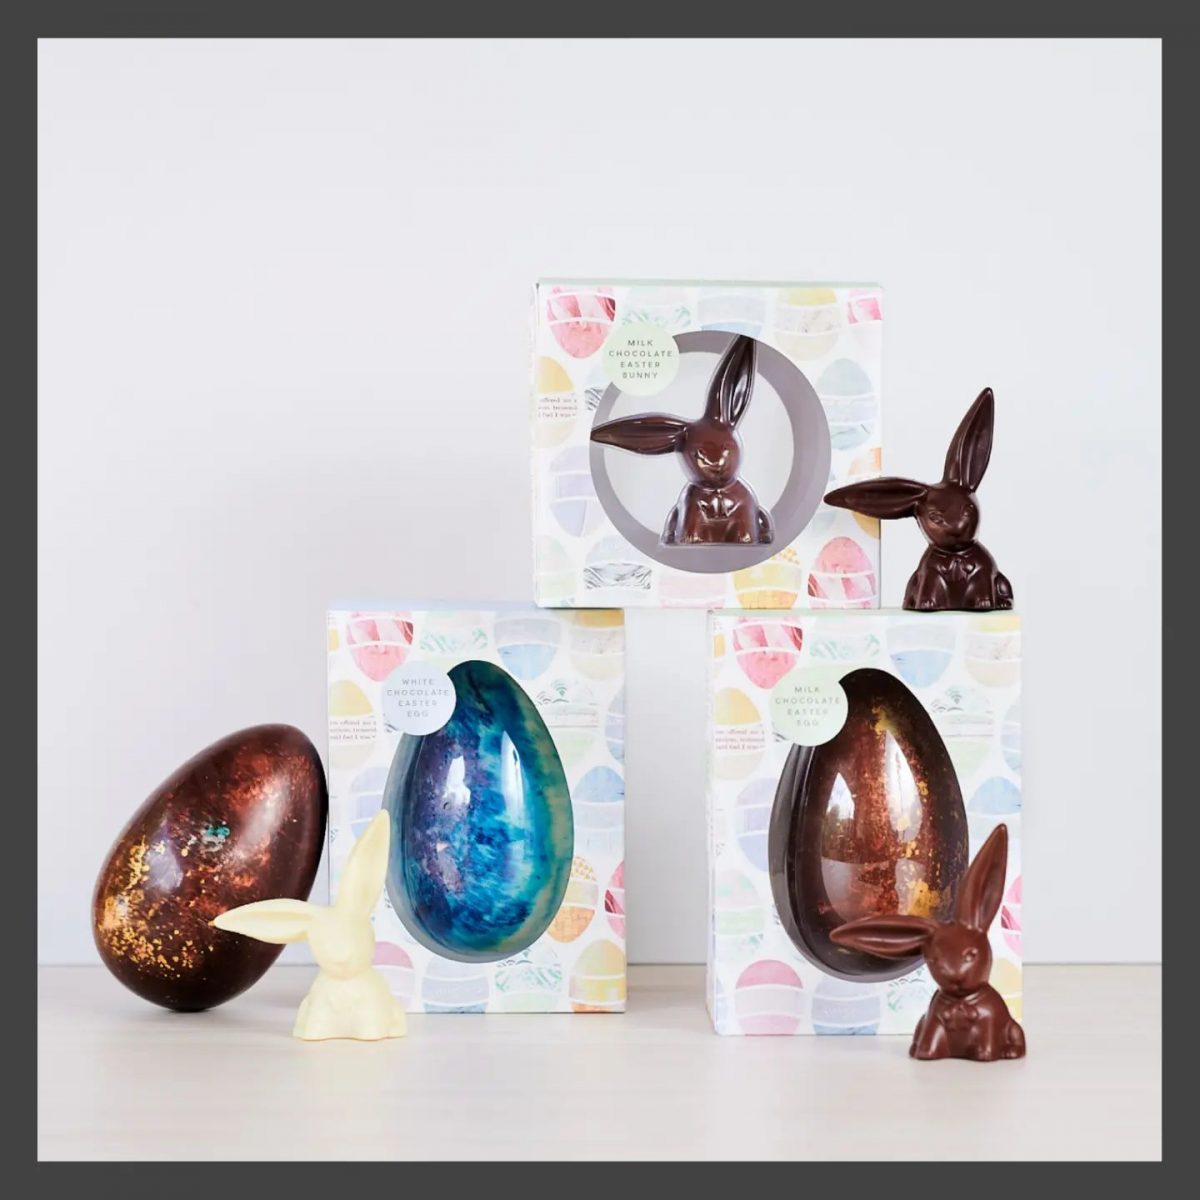 Display of chocolate eggs and bunnies.